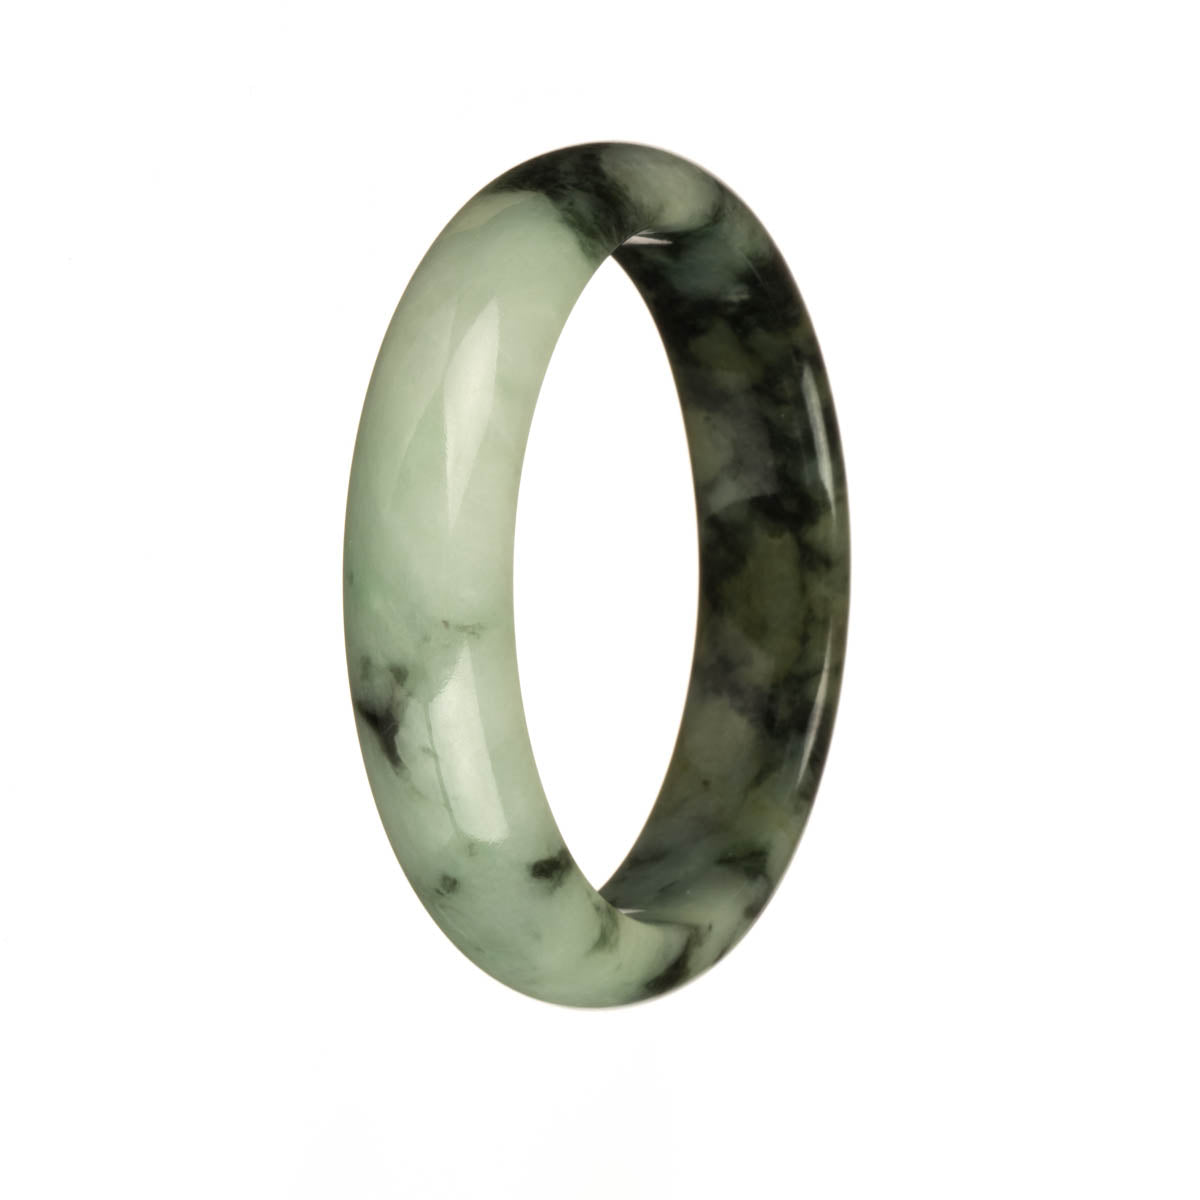 A beautiful jade bangle with intricate light green, dark green, and olive green patterns in a real grade A quality. The bangle is in a 54mm half moon shape, making it a stunning addition to any jewelry collection.